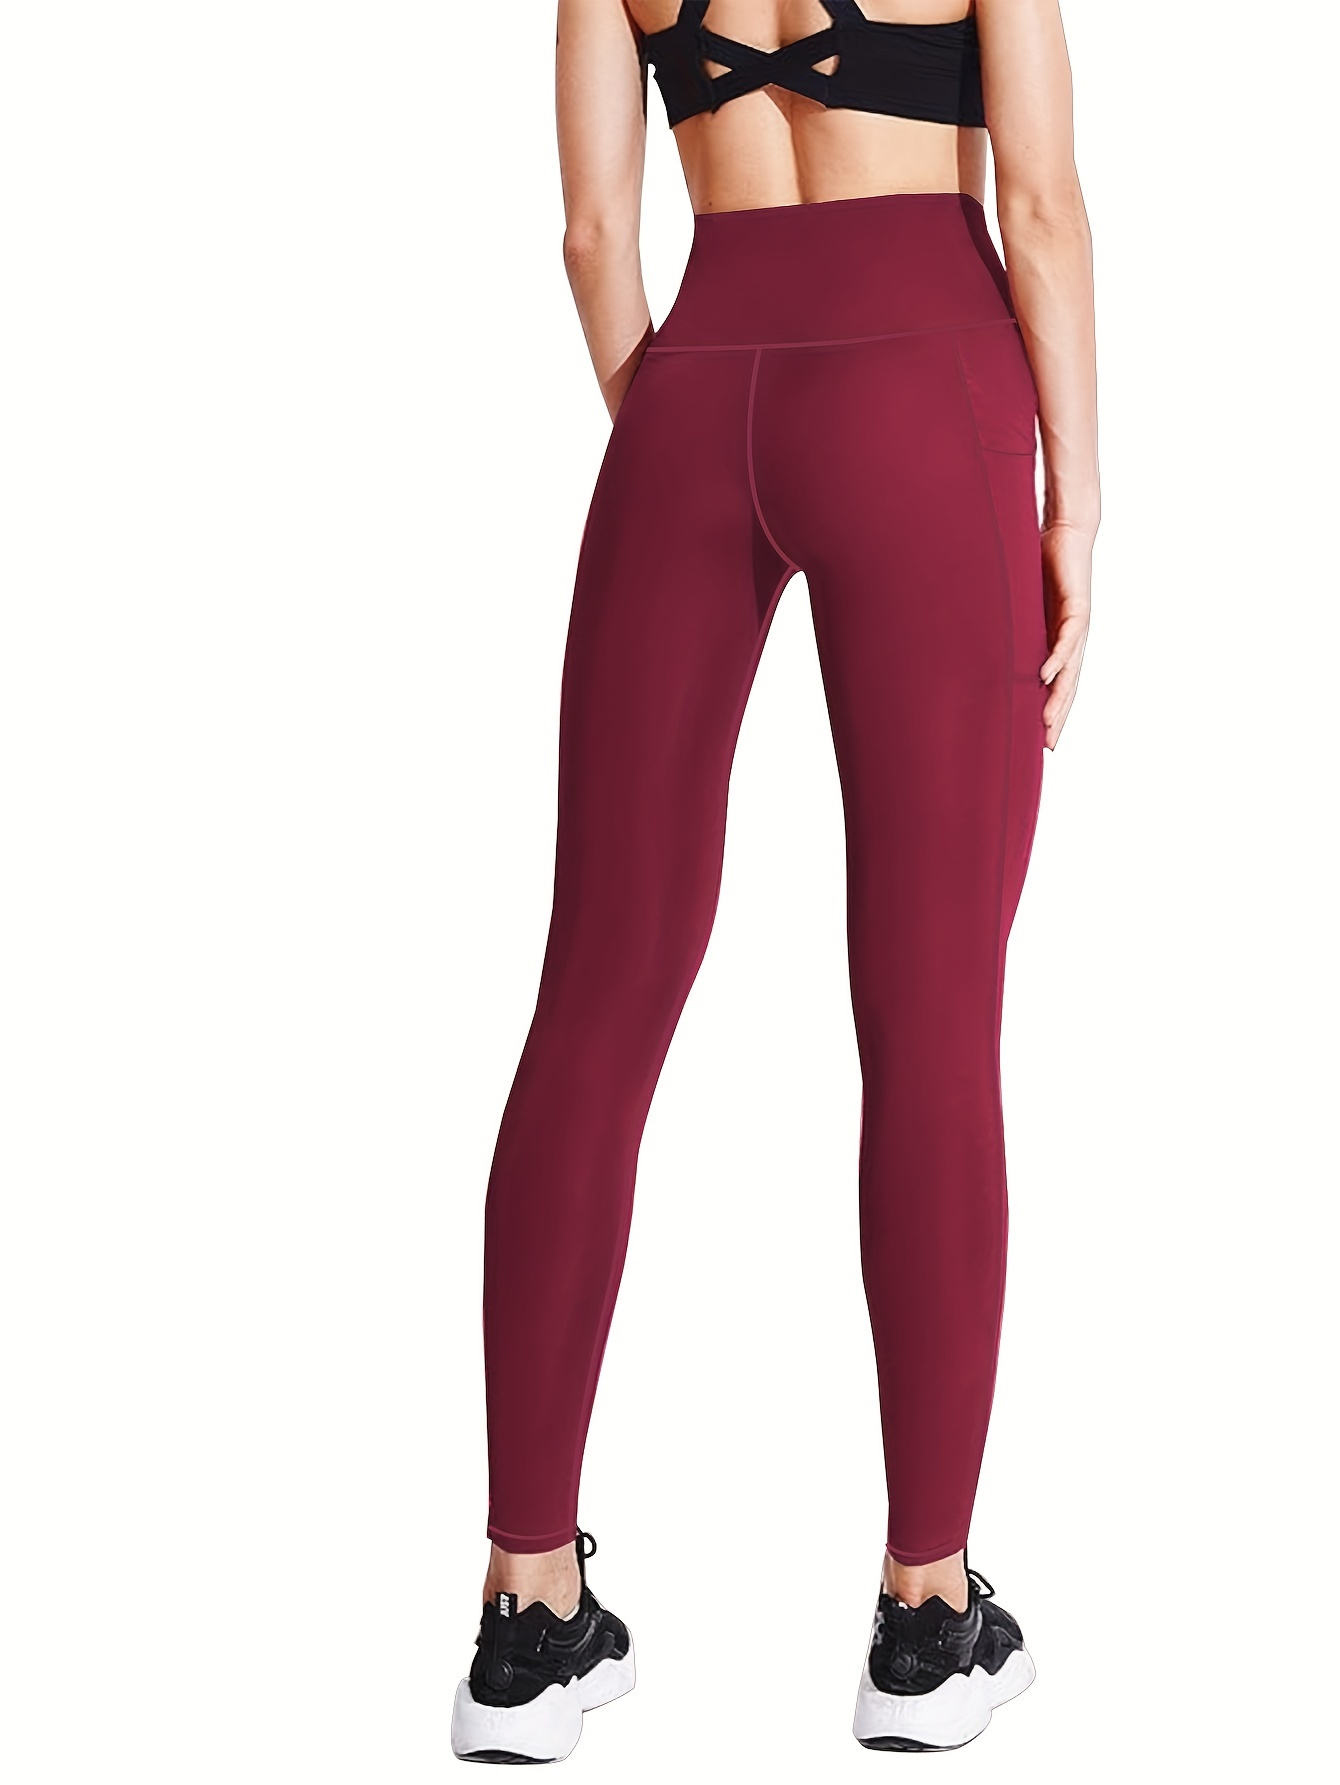 Women's Cardio Fitness Plus Size Leggings with Pocket - Pink and